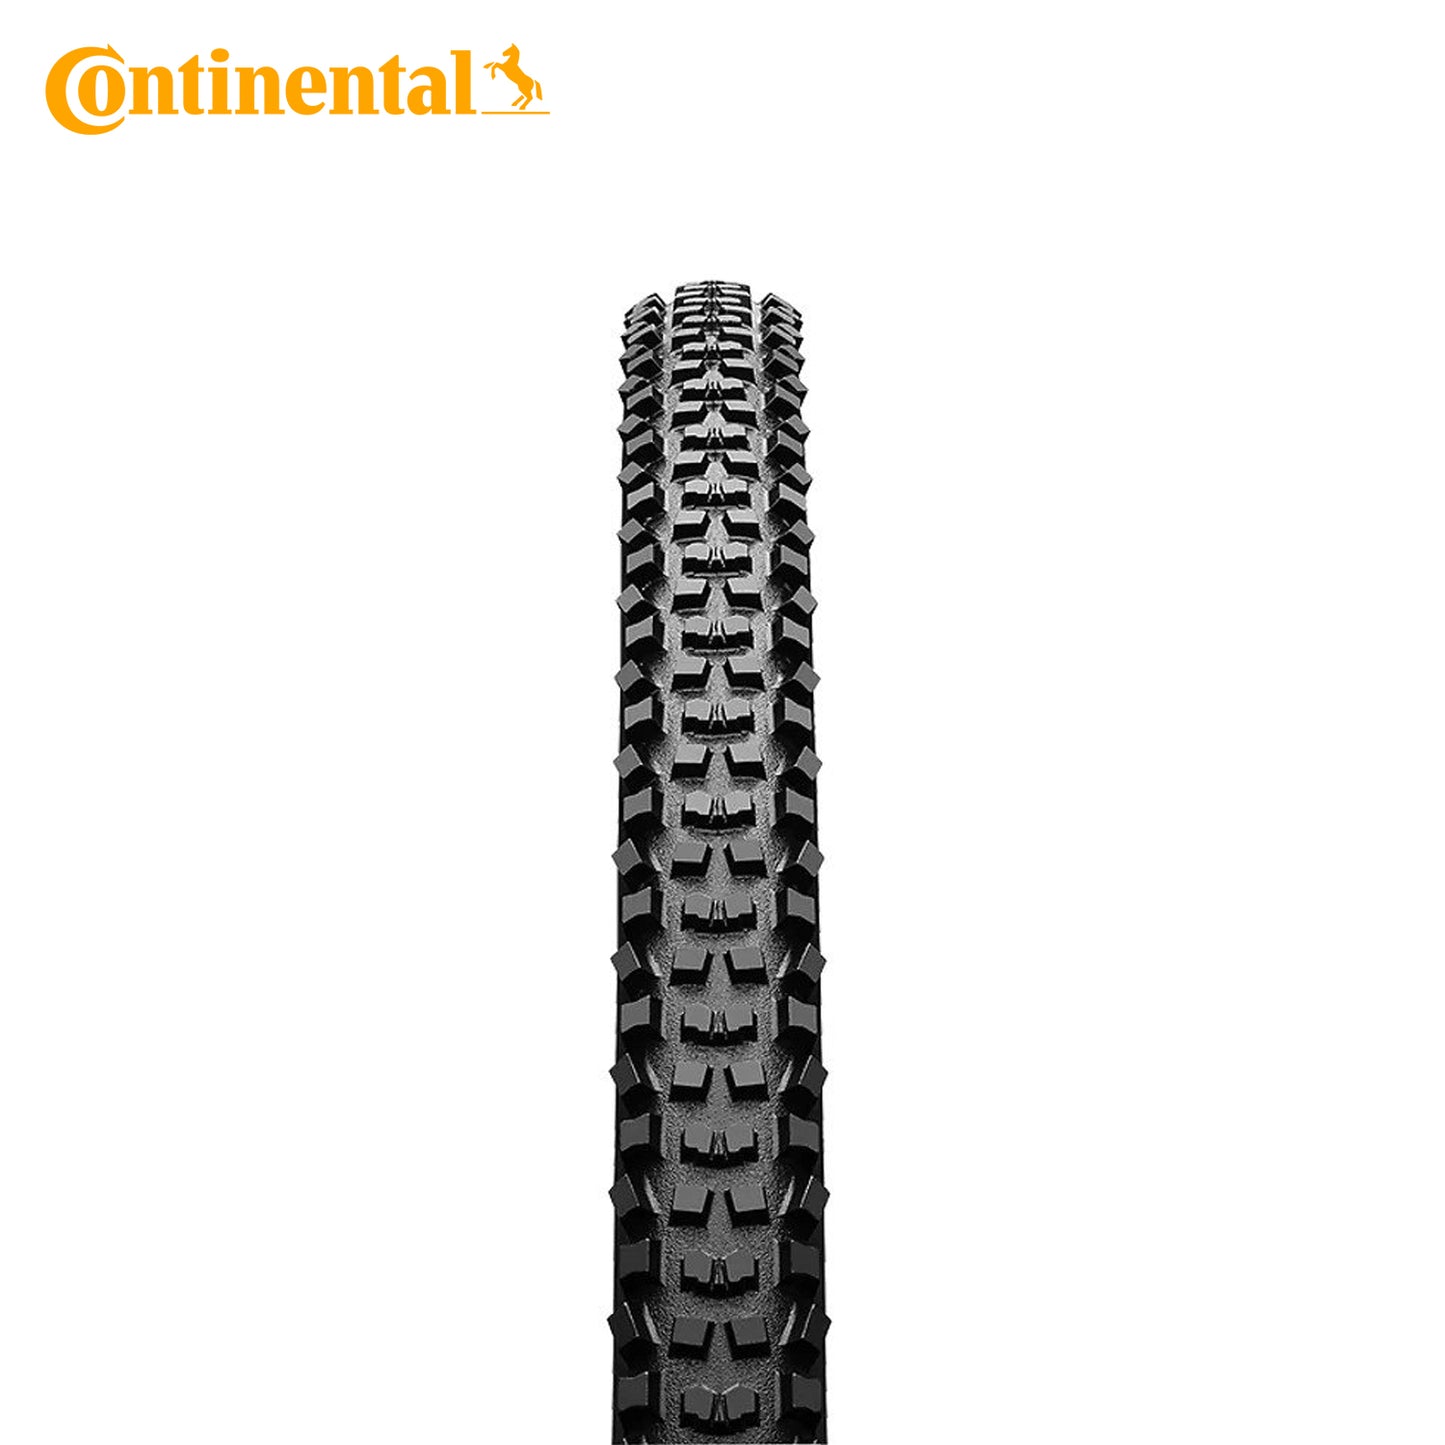 Continental Mountain King CX Cyclocross Tires 35mm